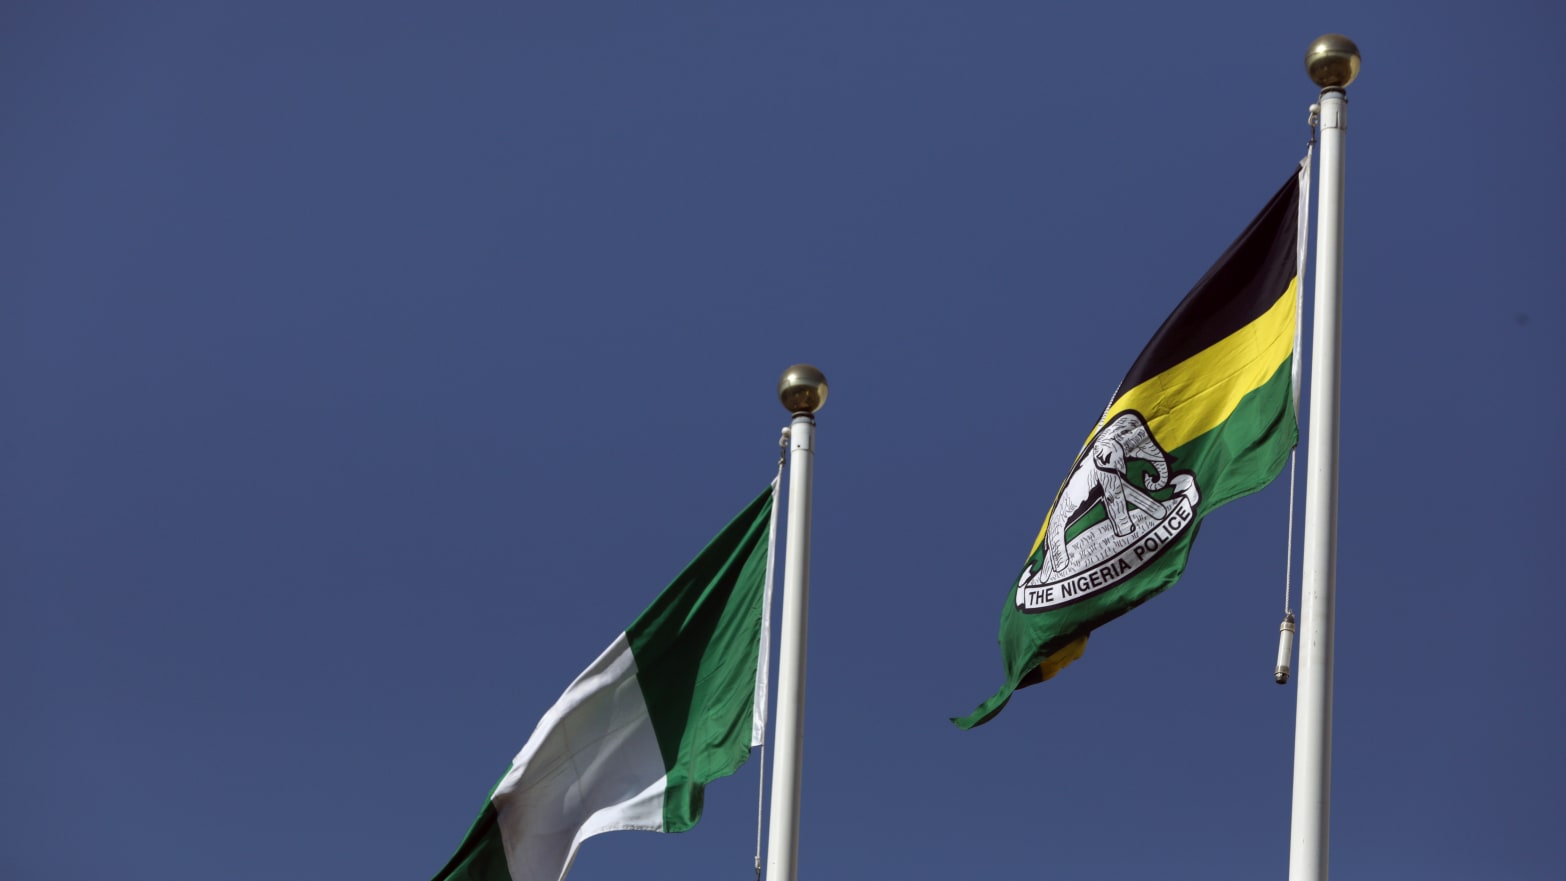 The Nigeria police flag flies next to the national flag.